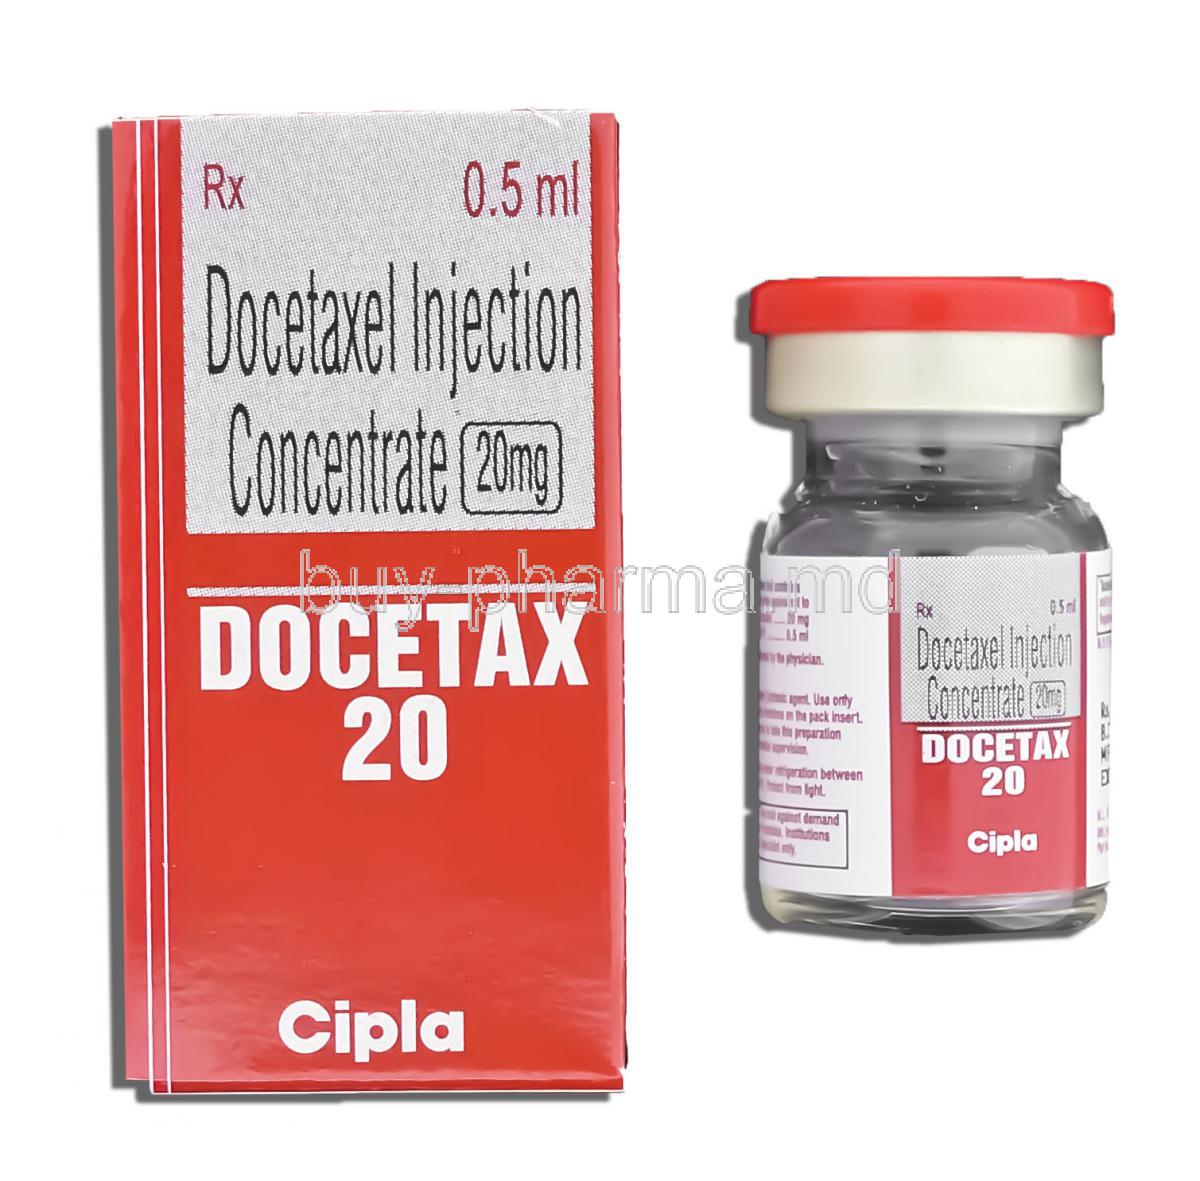 Docetax, eneric Taxotere /Docetaxel, Ticlopidine Injection 20mg/0.5ml